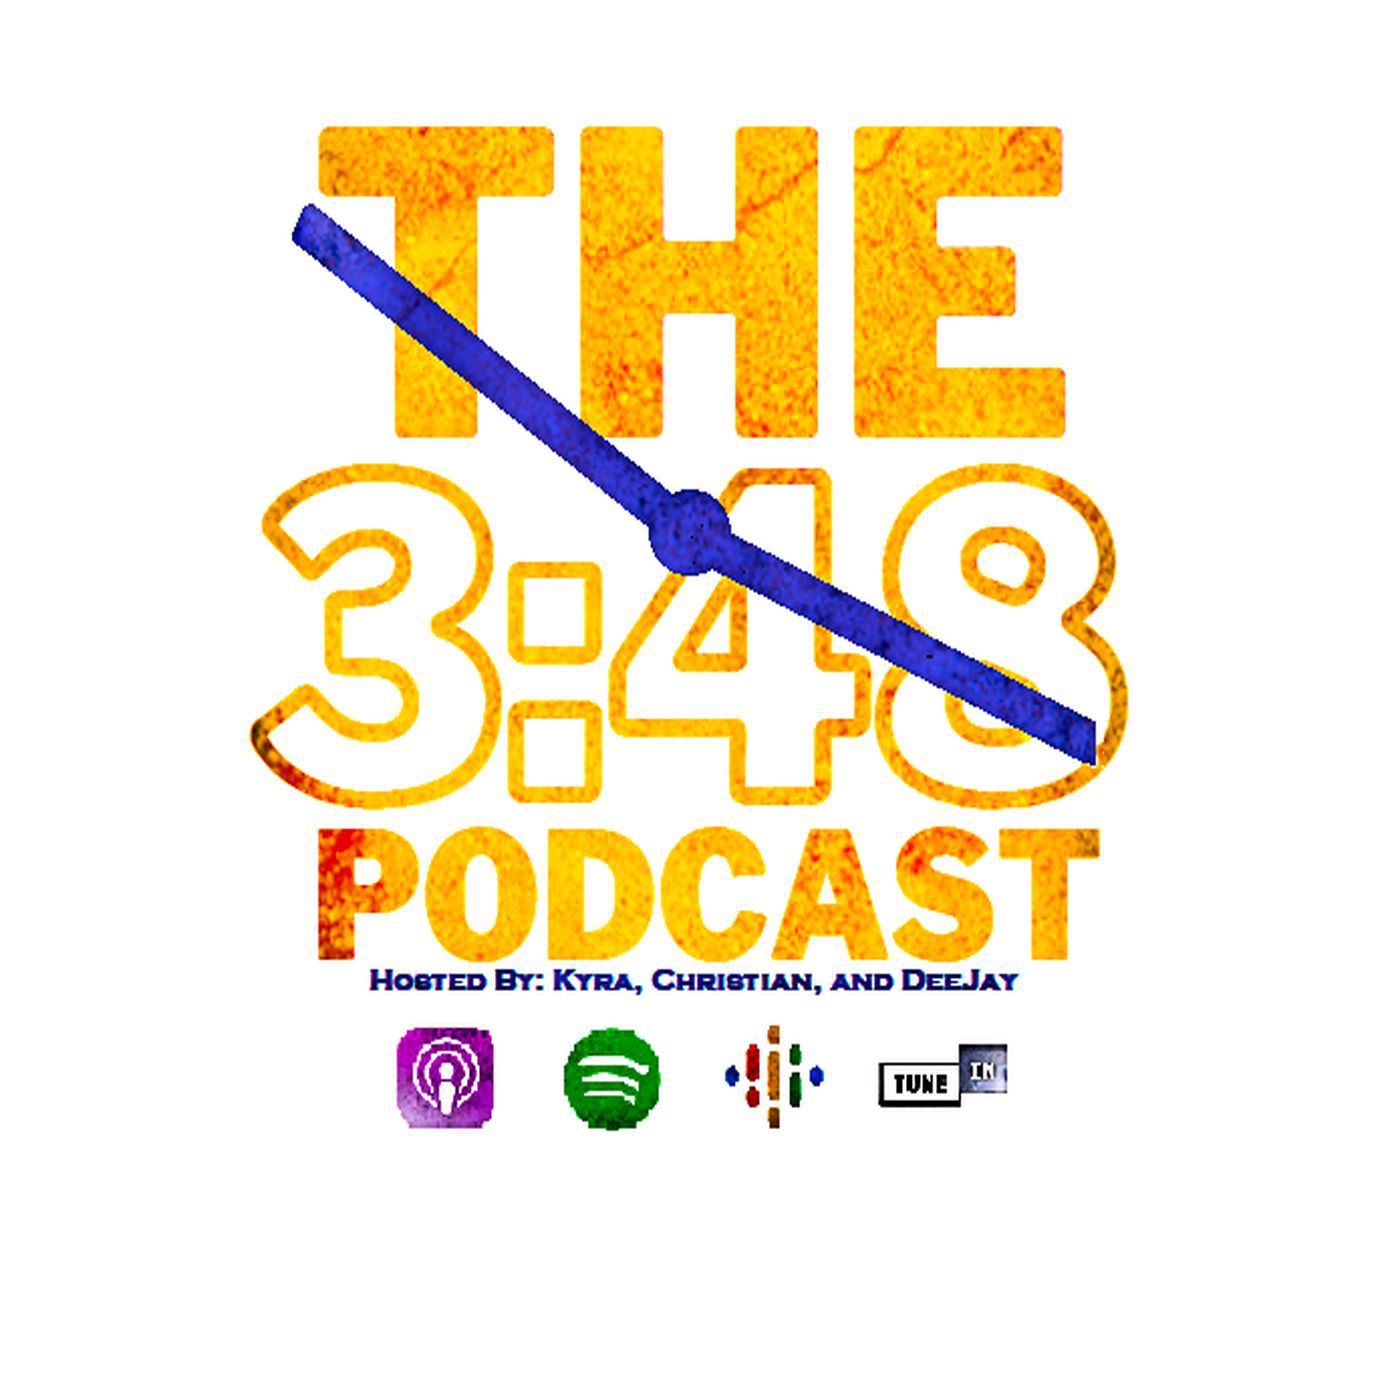 The 3:48 Podcast